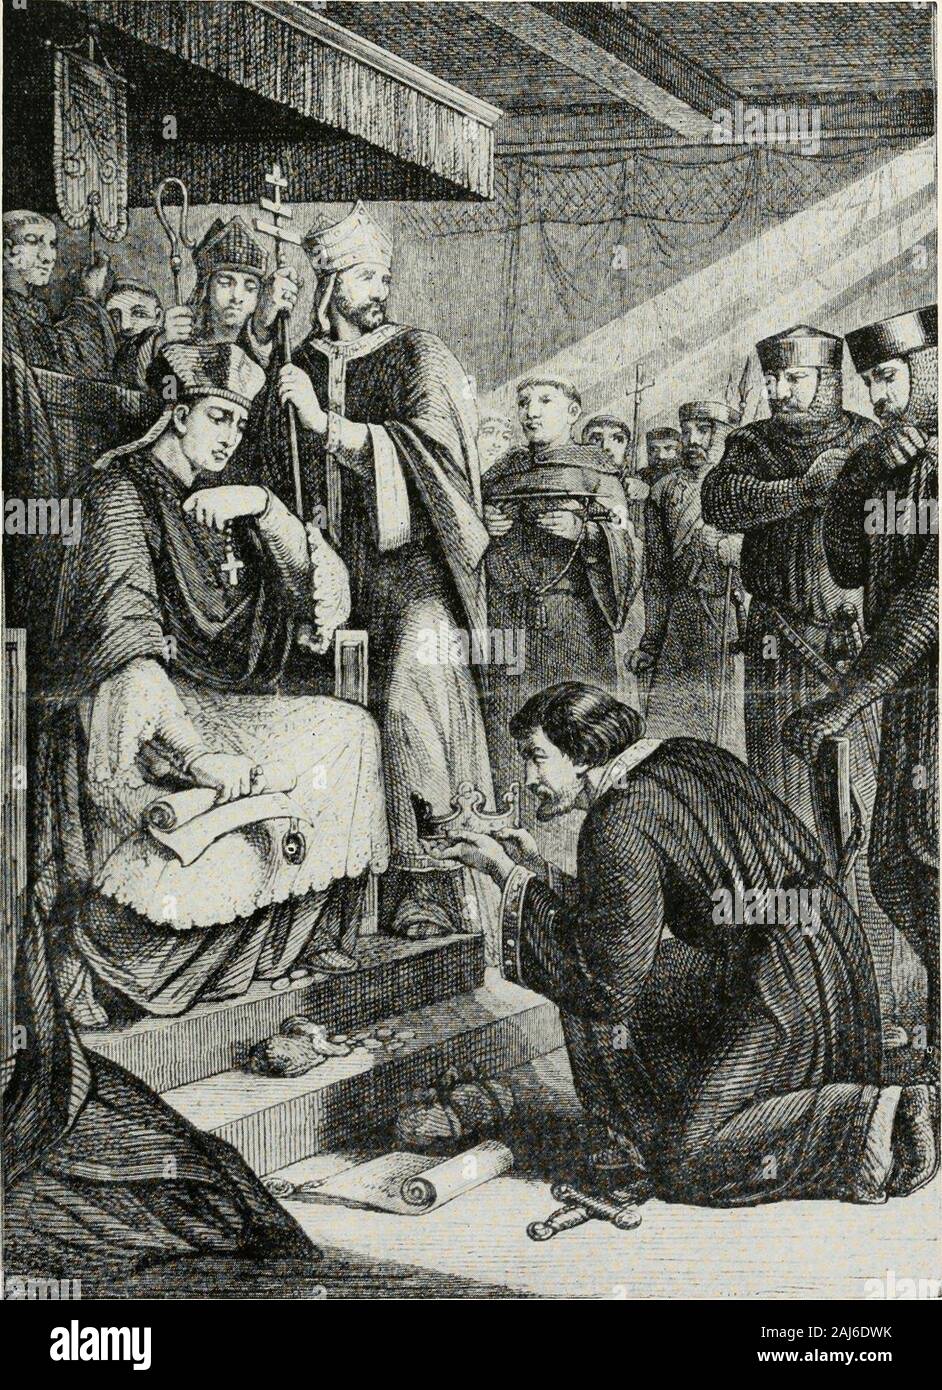 History of the Pilgrims and Puritans, their ancestry and descendants; basis of Americanization . KING JOHN SIGNING THE MAGNA CHARTA. Only a pen scrawl above the seal of the king made theprovisions of the Charta law, but the text on the parchmentpurports to settle the rights of Englishmen to breathe andhave being and to give a square deal for 800 years. Royalarrogance, the dogma of the Divine Right of Kings, in-surrection, feuds, and persecutions swung the law oflf baseinnumerable times. Centuries of legal thought have never coined a strongerfreedom-edict than that one thrust into the very cent Stock Photo